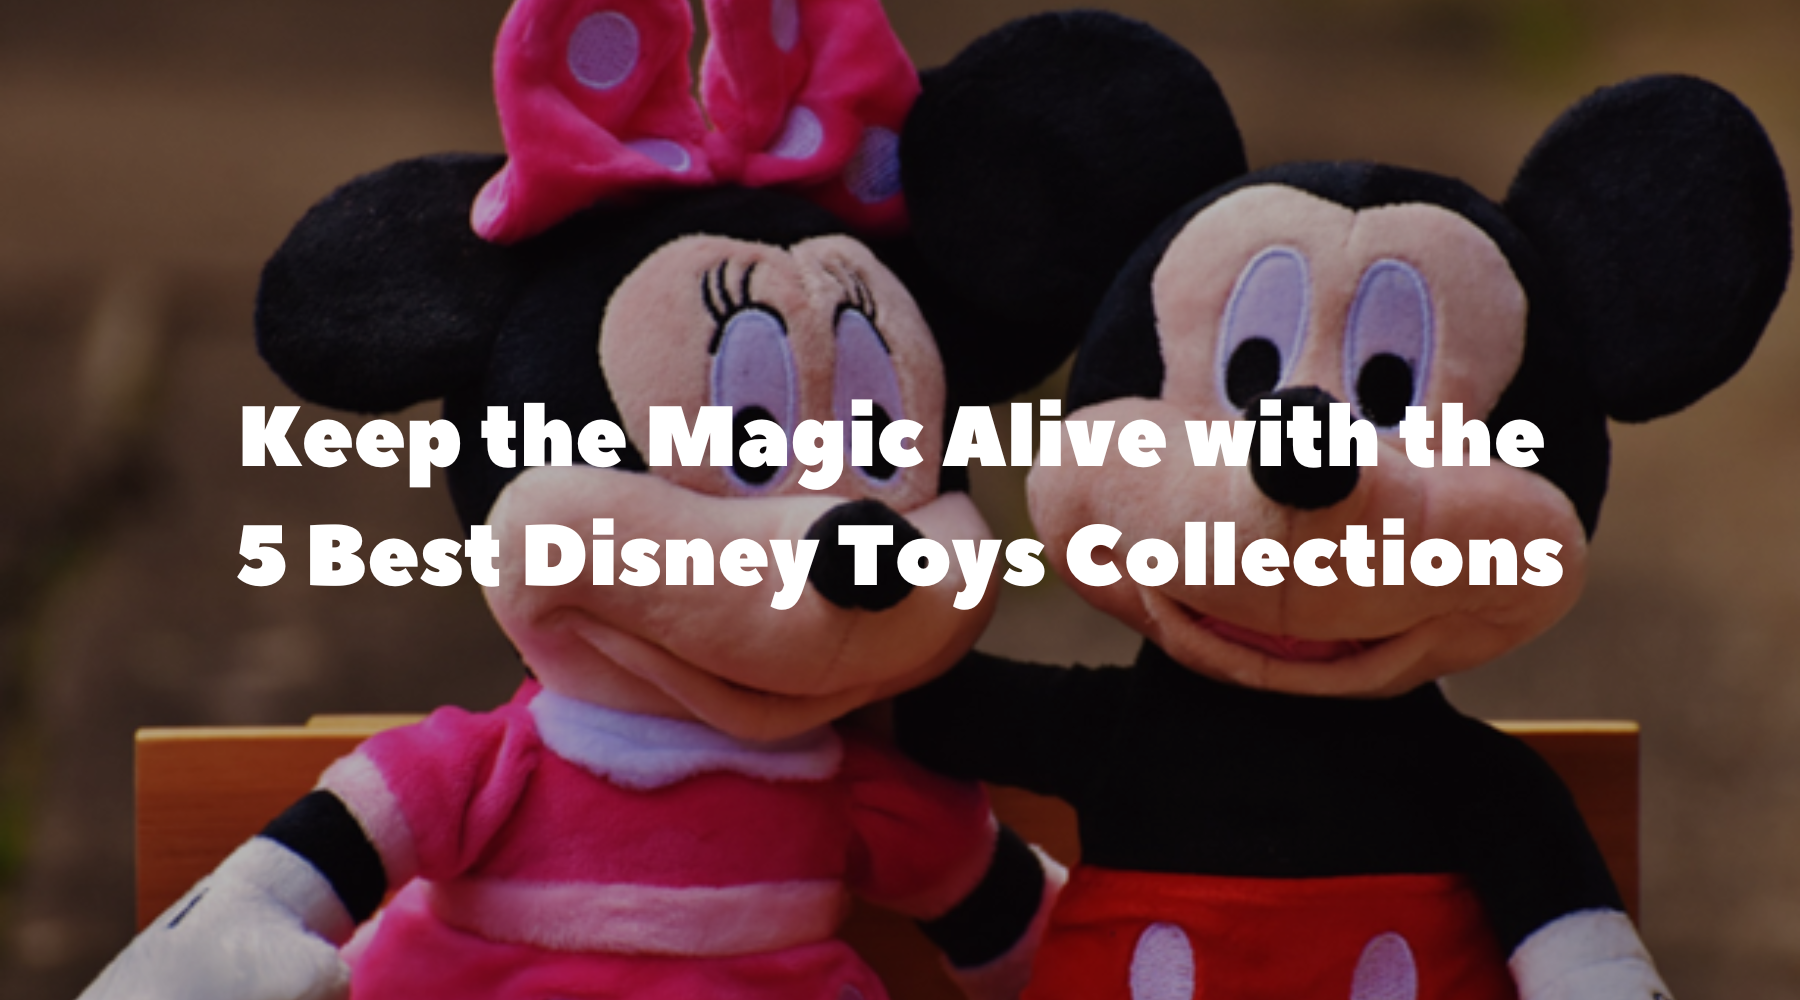 Keep the Magic Alive with the 5 Best Disney Toys Collections